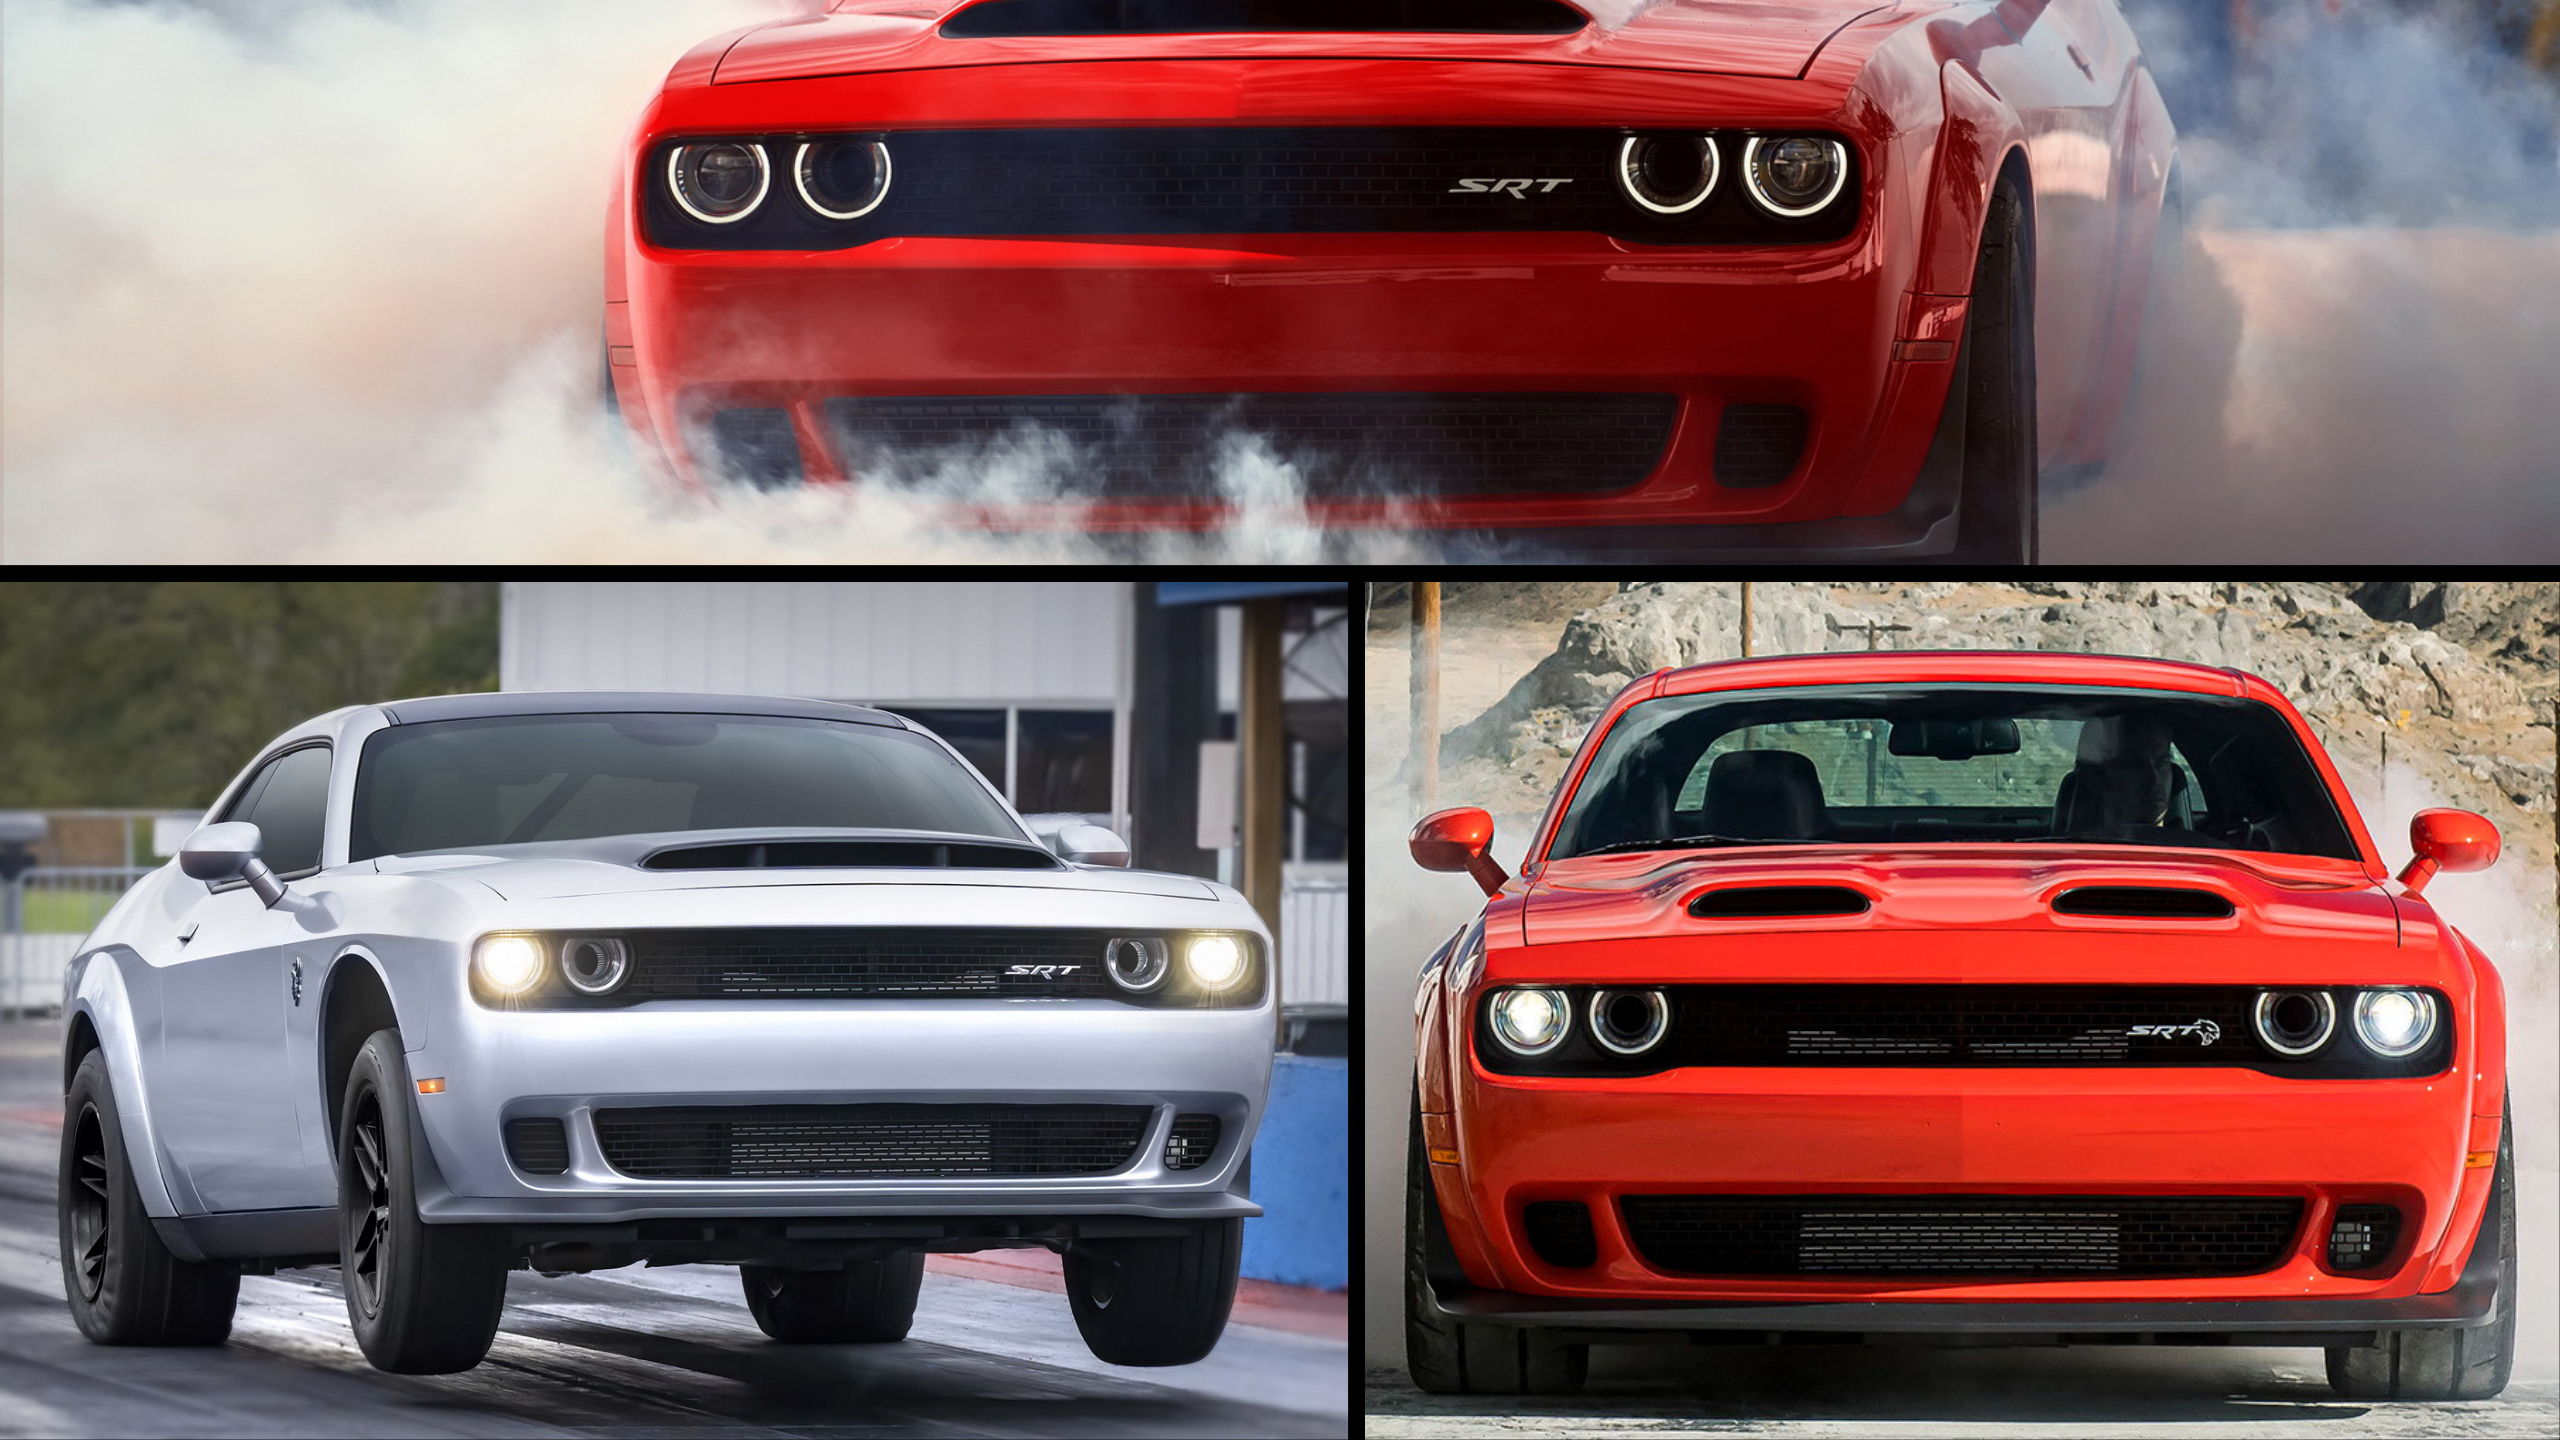 Final Dodge Challenger V8 muscle car steps forward with more than